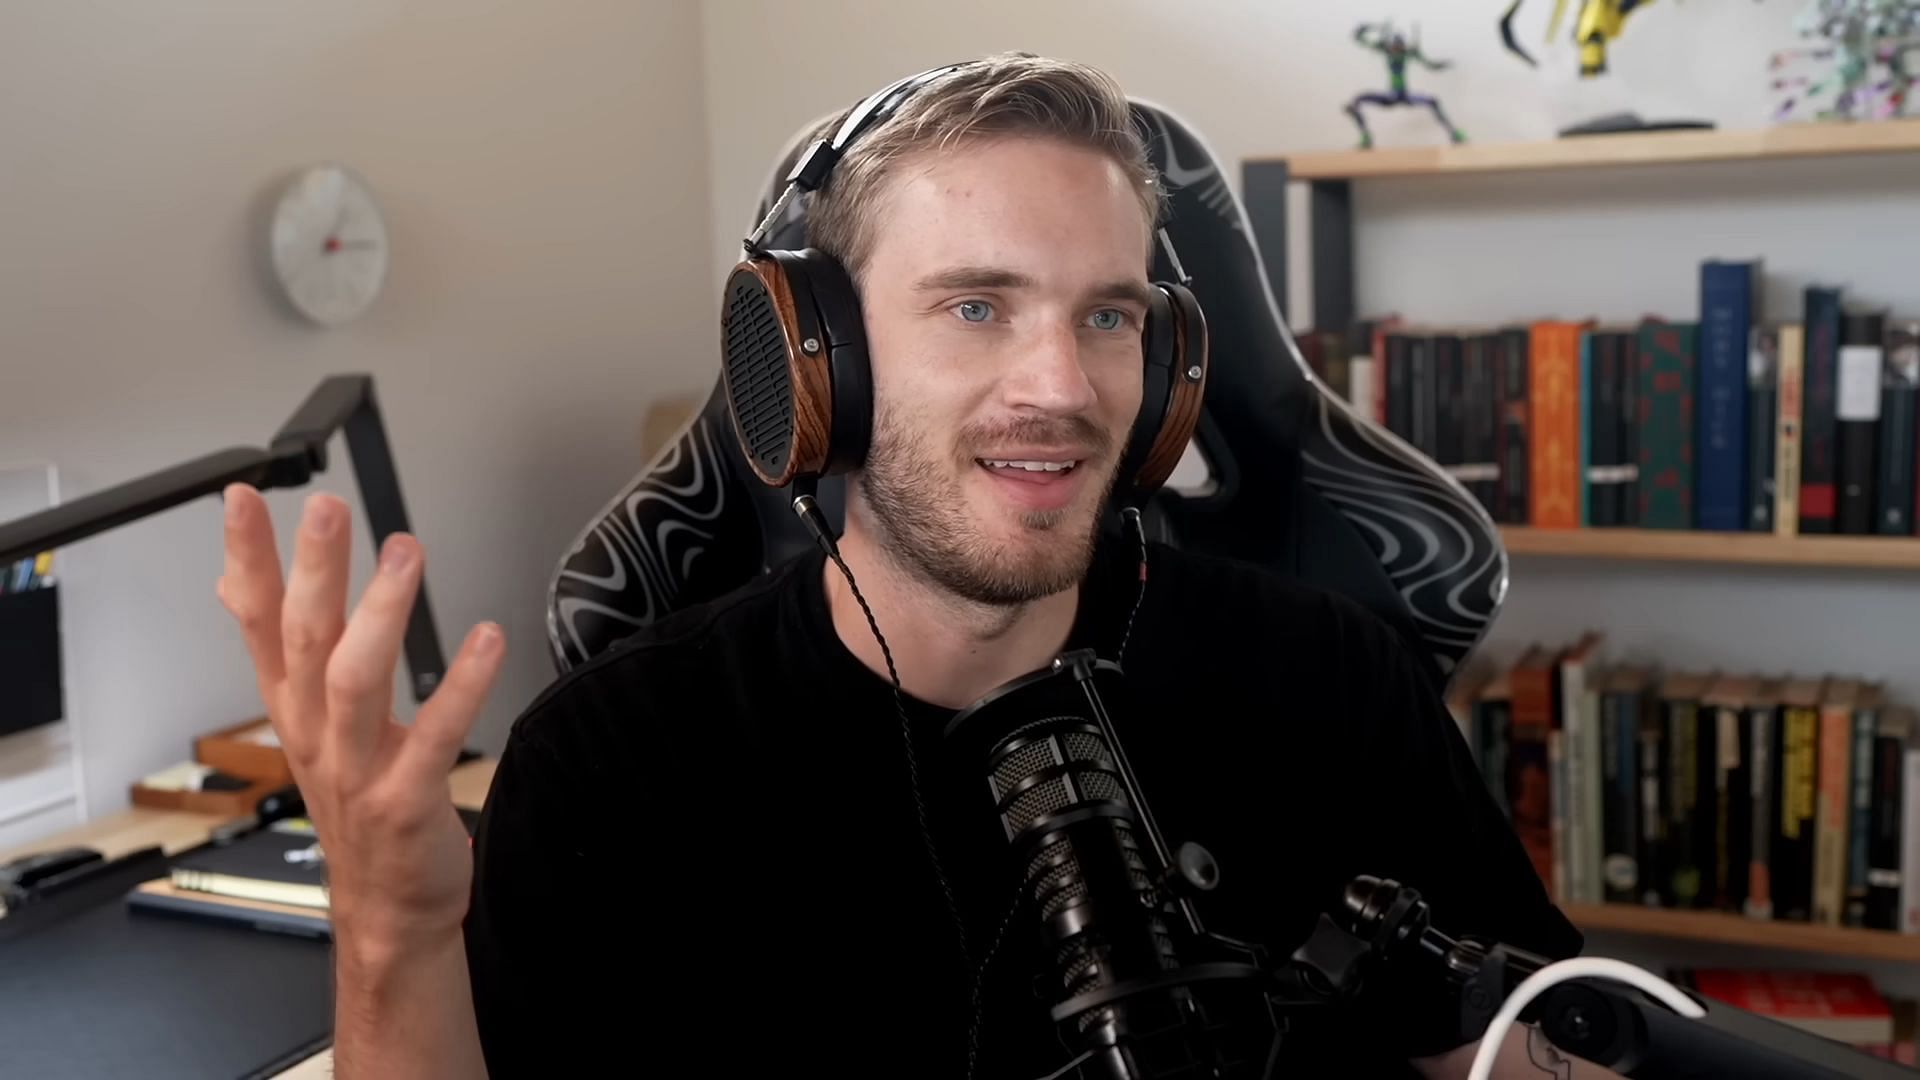 PewDiePie is not retired, but his YouTube channel has stagnated for sure (Image via PewDiePie/YouTube)